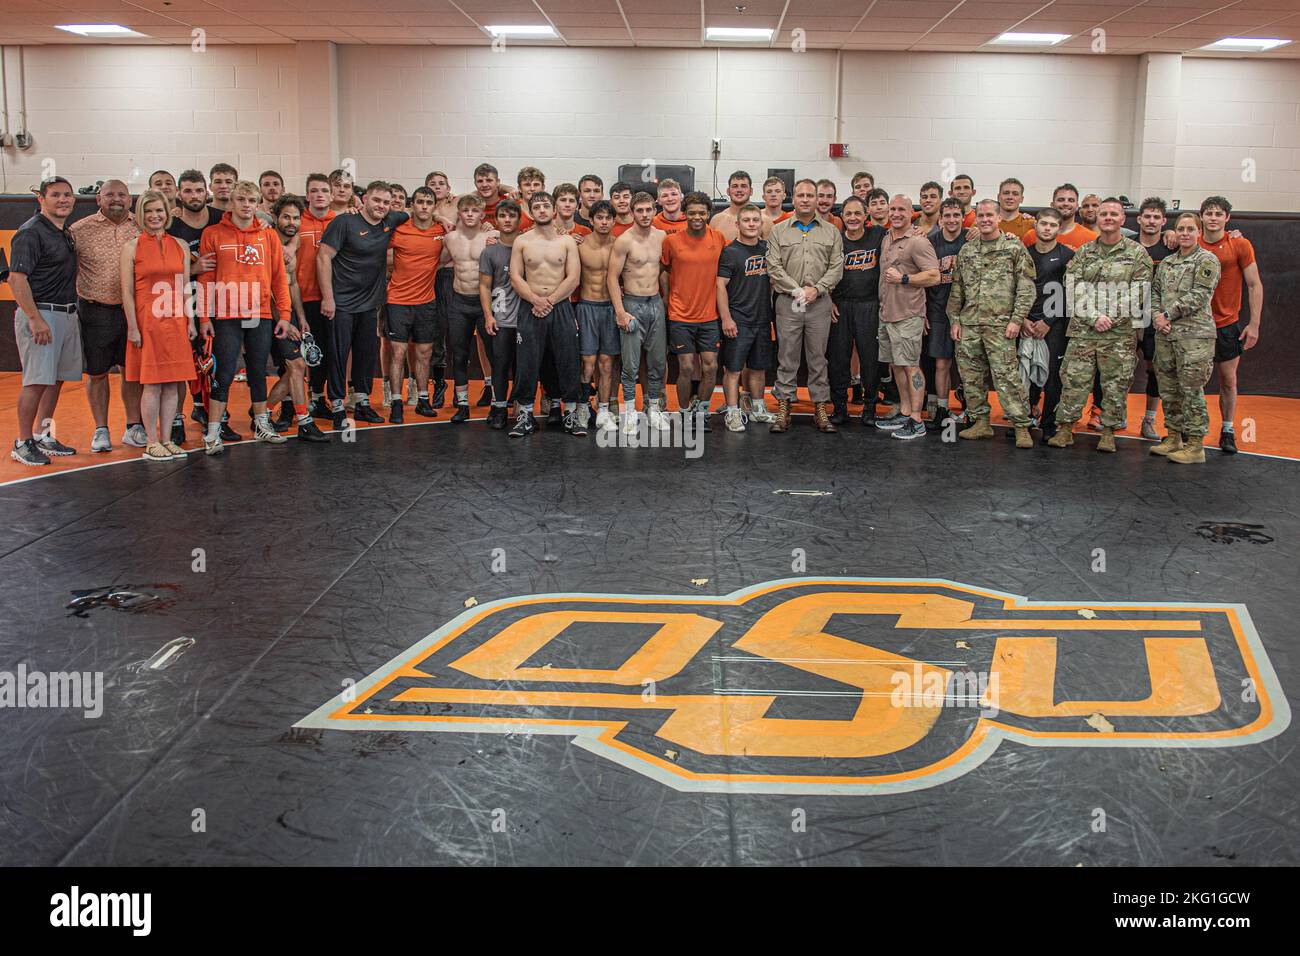 Master Sgt. Earl Plumlee, a Medal of Honor receipient, poses with members of the Oklahoma State University wrestling team in Stillwater, Oklahoma, Oct. 22, 2022. Plumlee, a native Oklahoman, toured his home state Oct. 18-22. During his visit, Plumlee met with several groups and shared his experiences with them. (Oklahoma National Guard photo by Sgt. Anthony Jones) Stock Photo